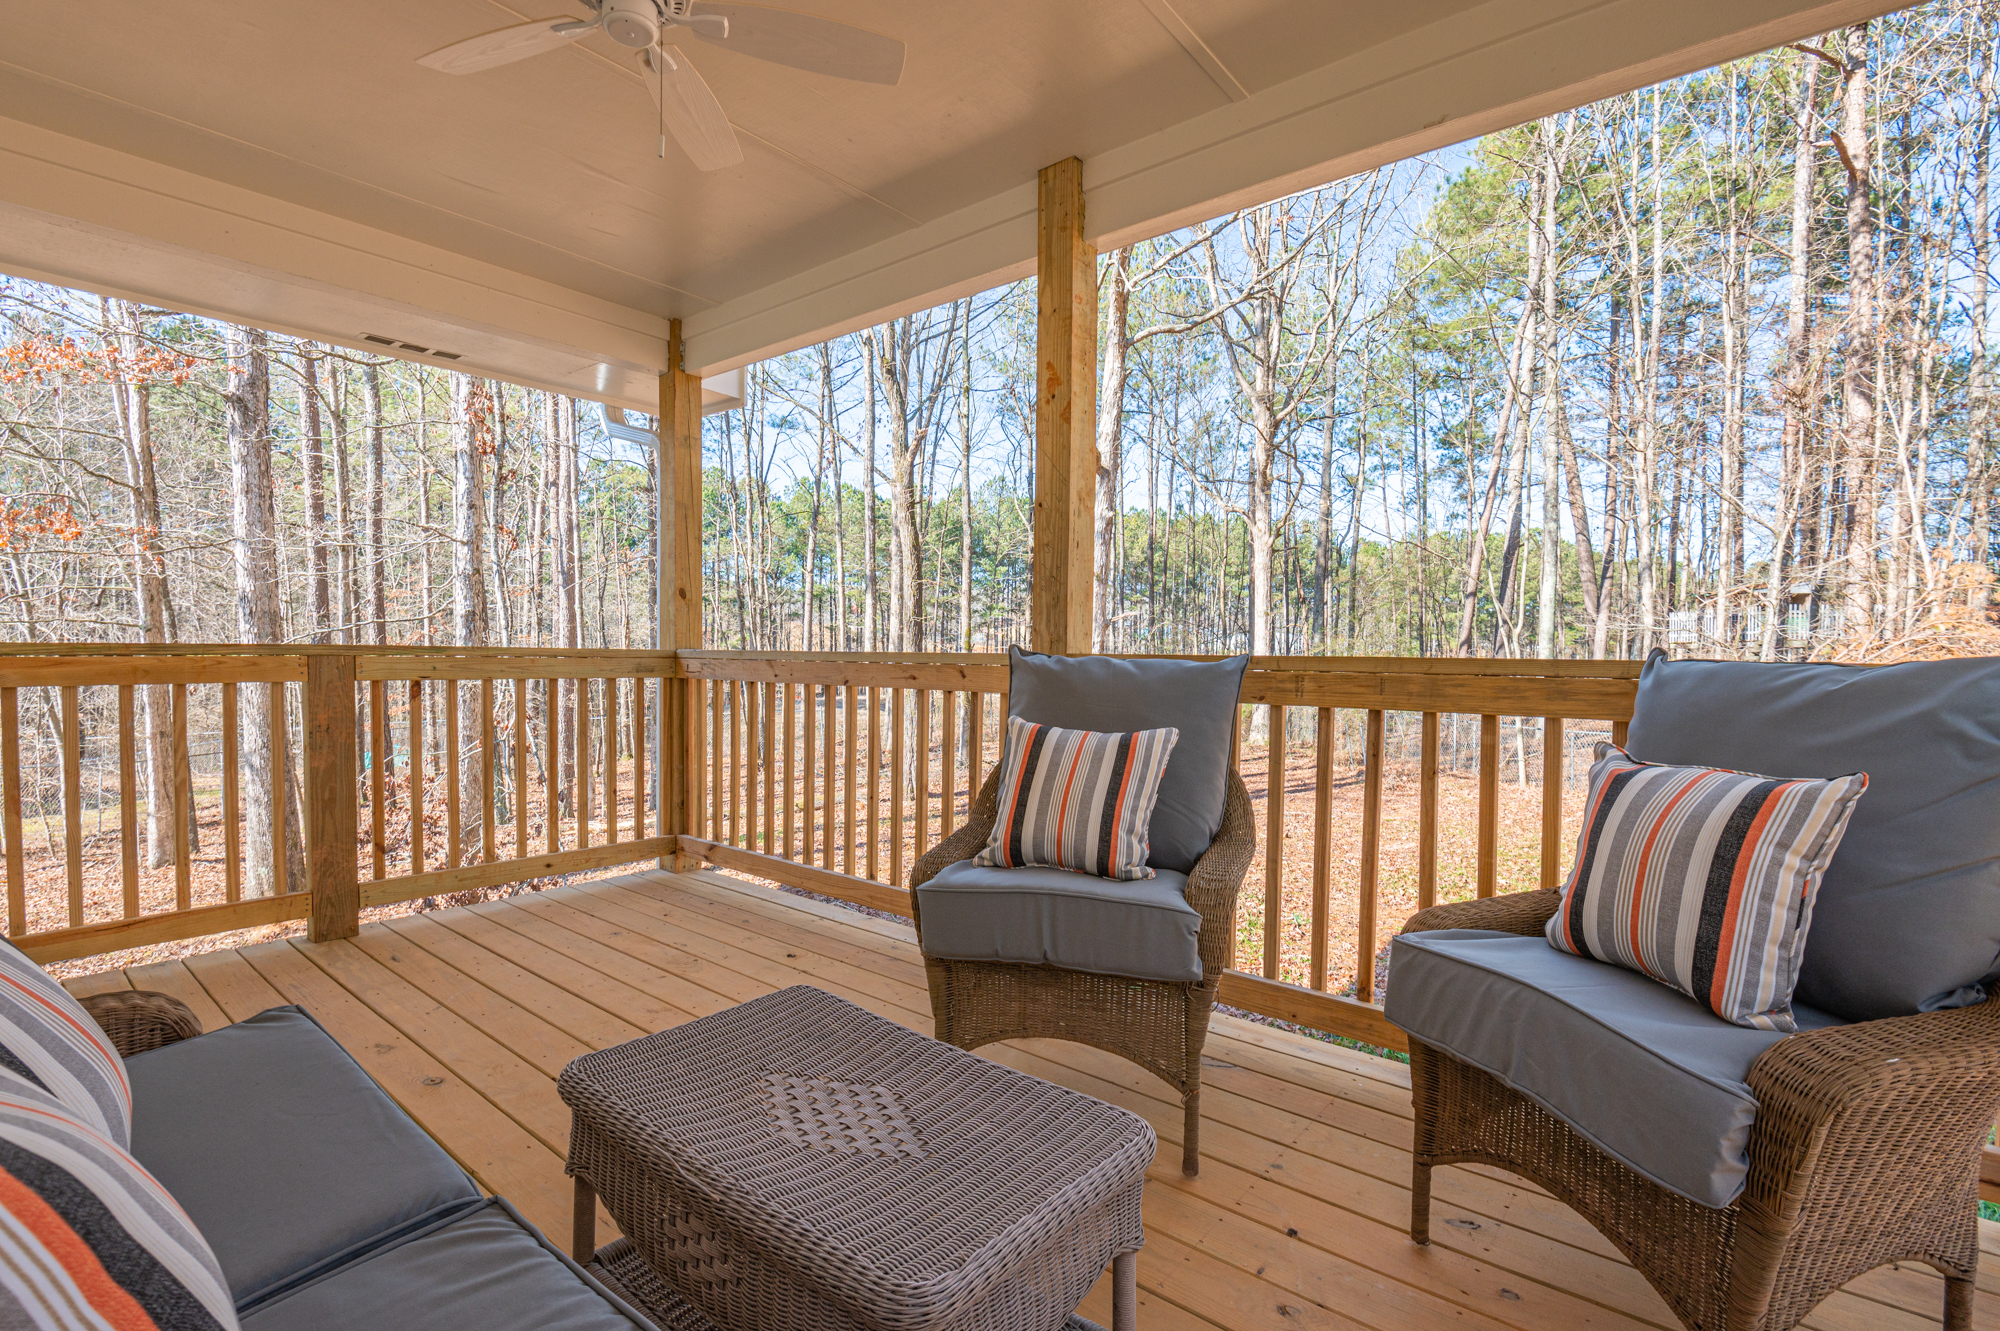 Cabin Style & Comfy Back Deck Near LakePoint PBR